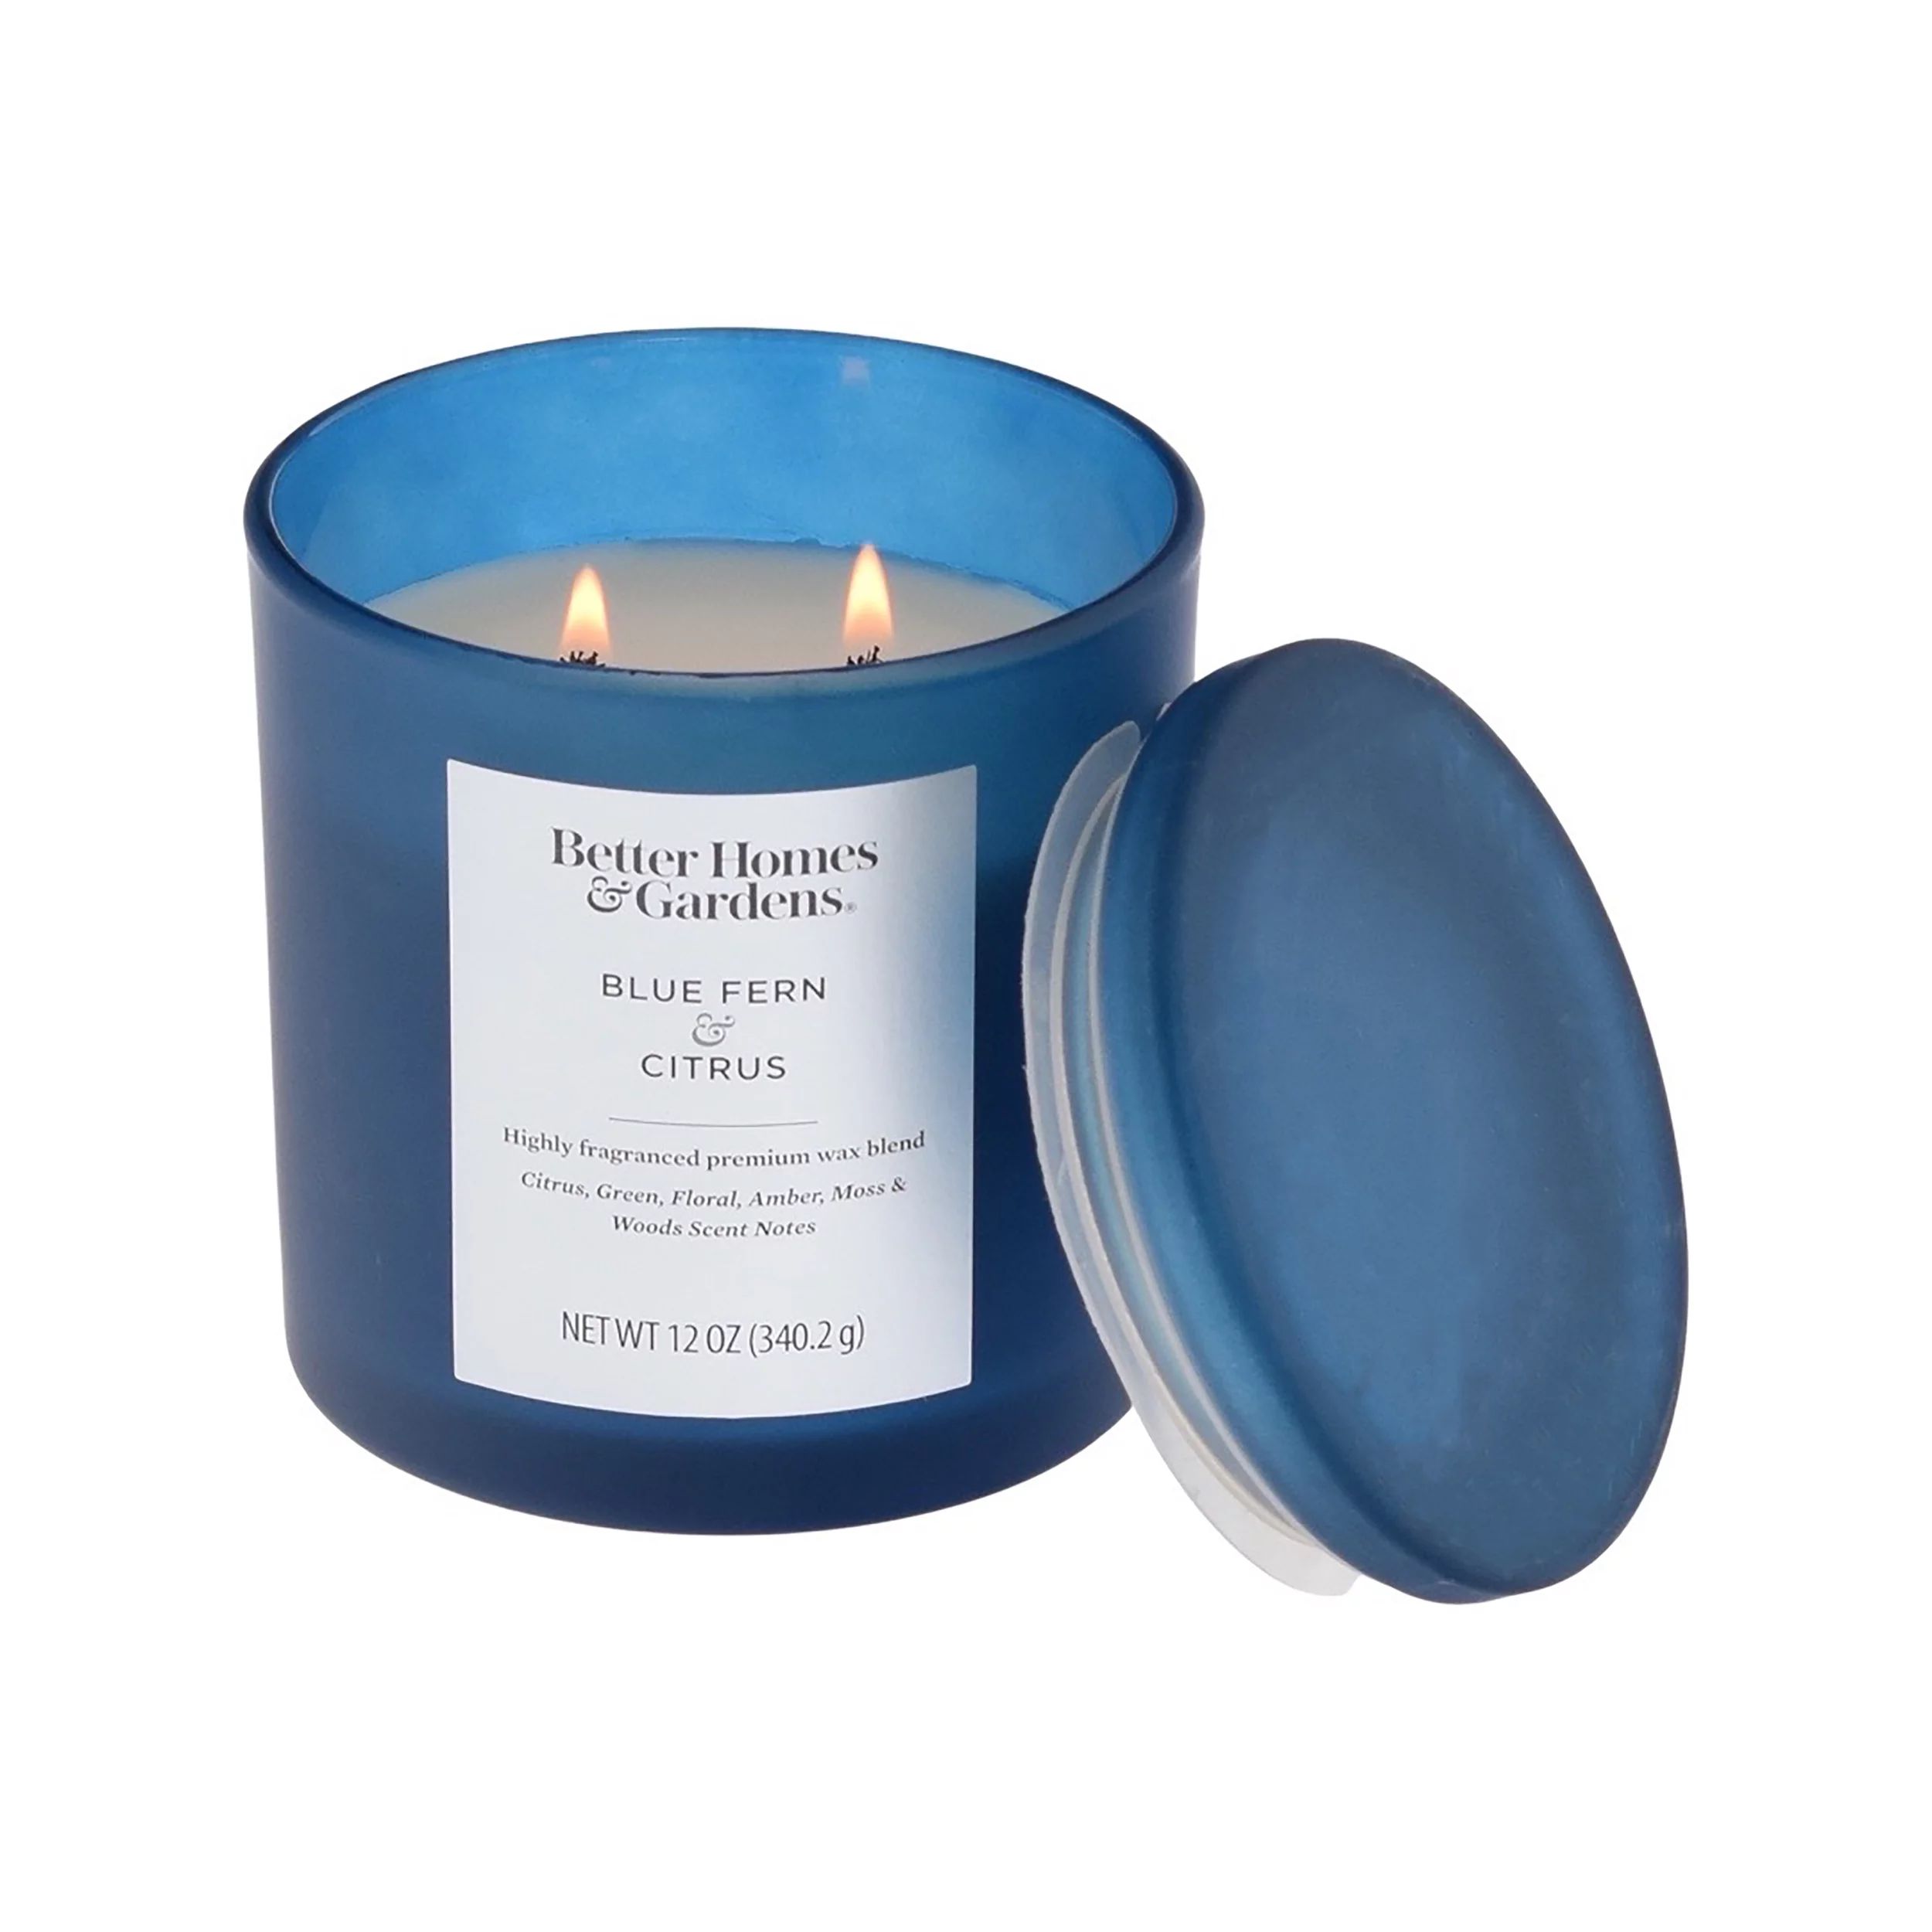 Better Homes & Gardens 12oz Blue Fern & Citrus Scented 2-Wick Jar Candle with Glass Lid | Walmart (US)